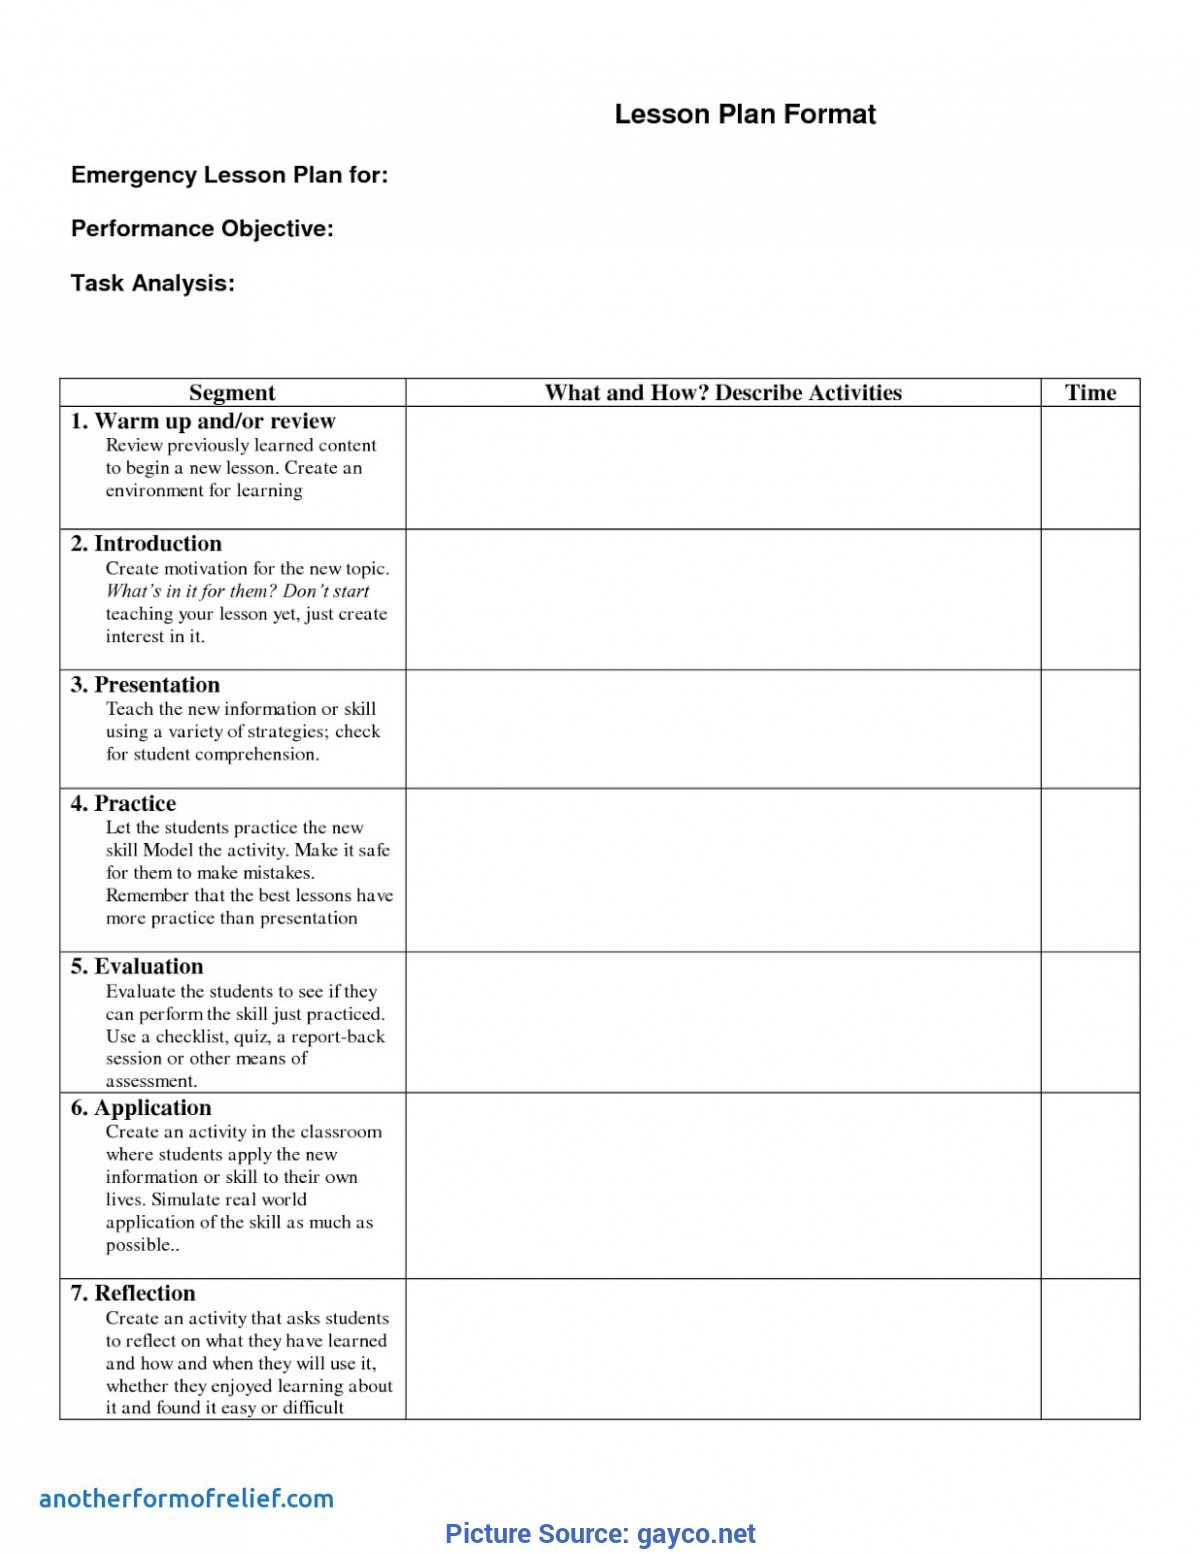 Special Lessons Learned Checklist Template 1 Lessons Learnt For Lessons Learnt Report Template